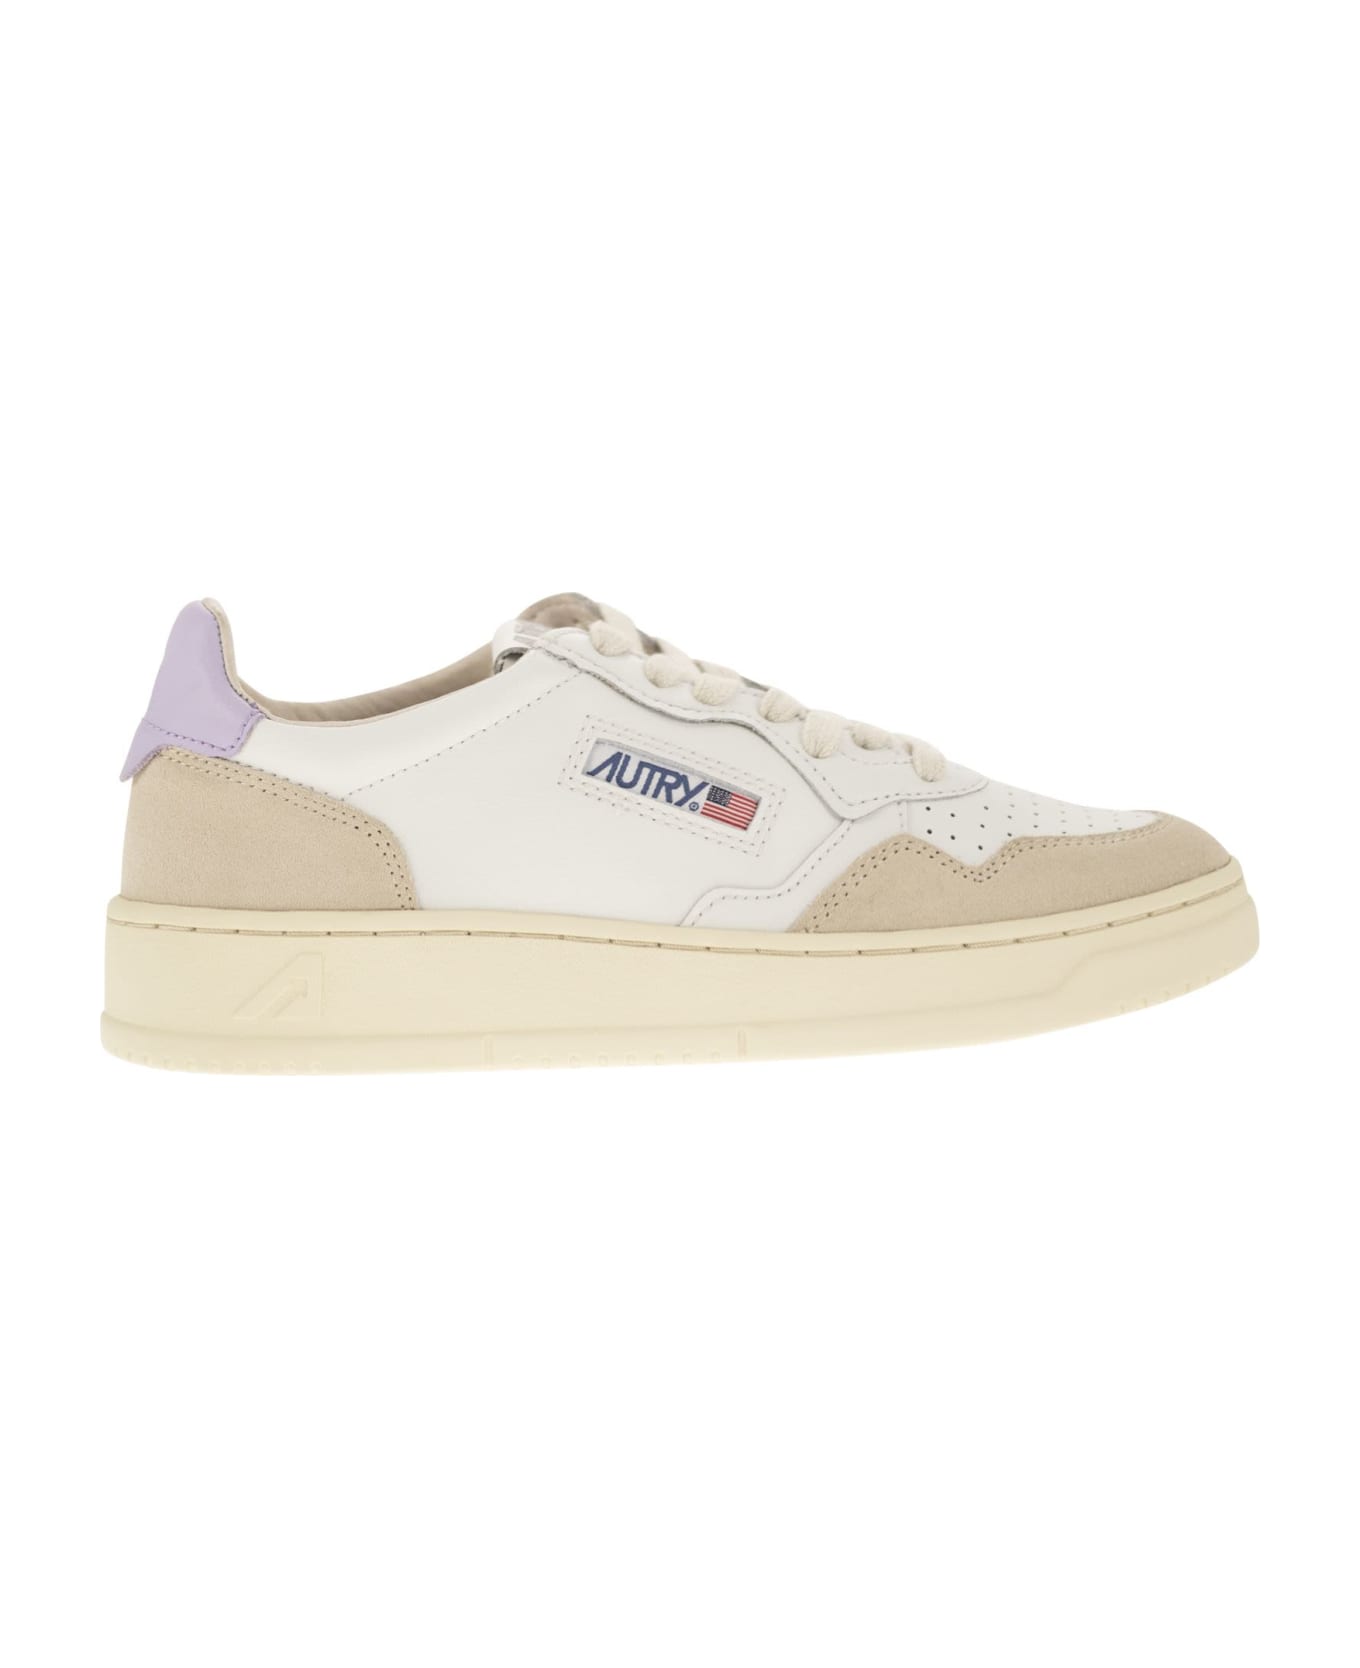 Autry Medalist Low Leather And Suede Sneakers - White/Lilac スニーカー